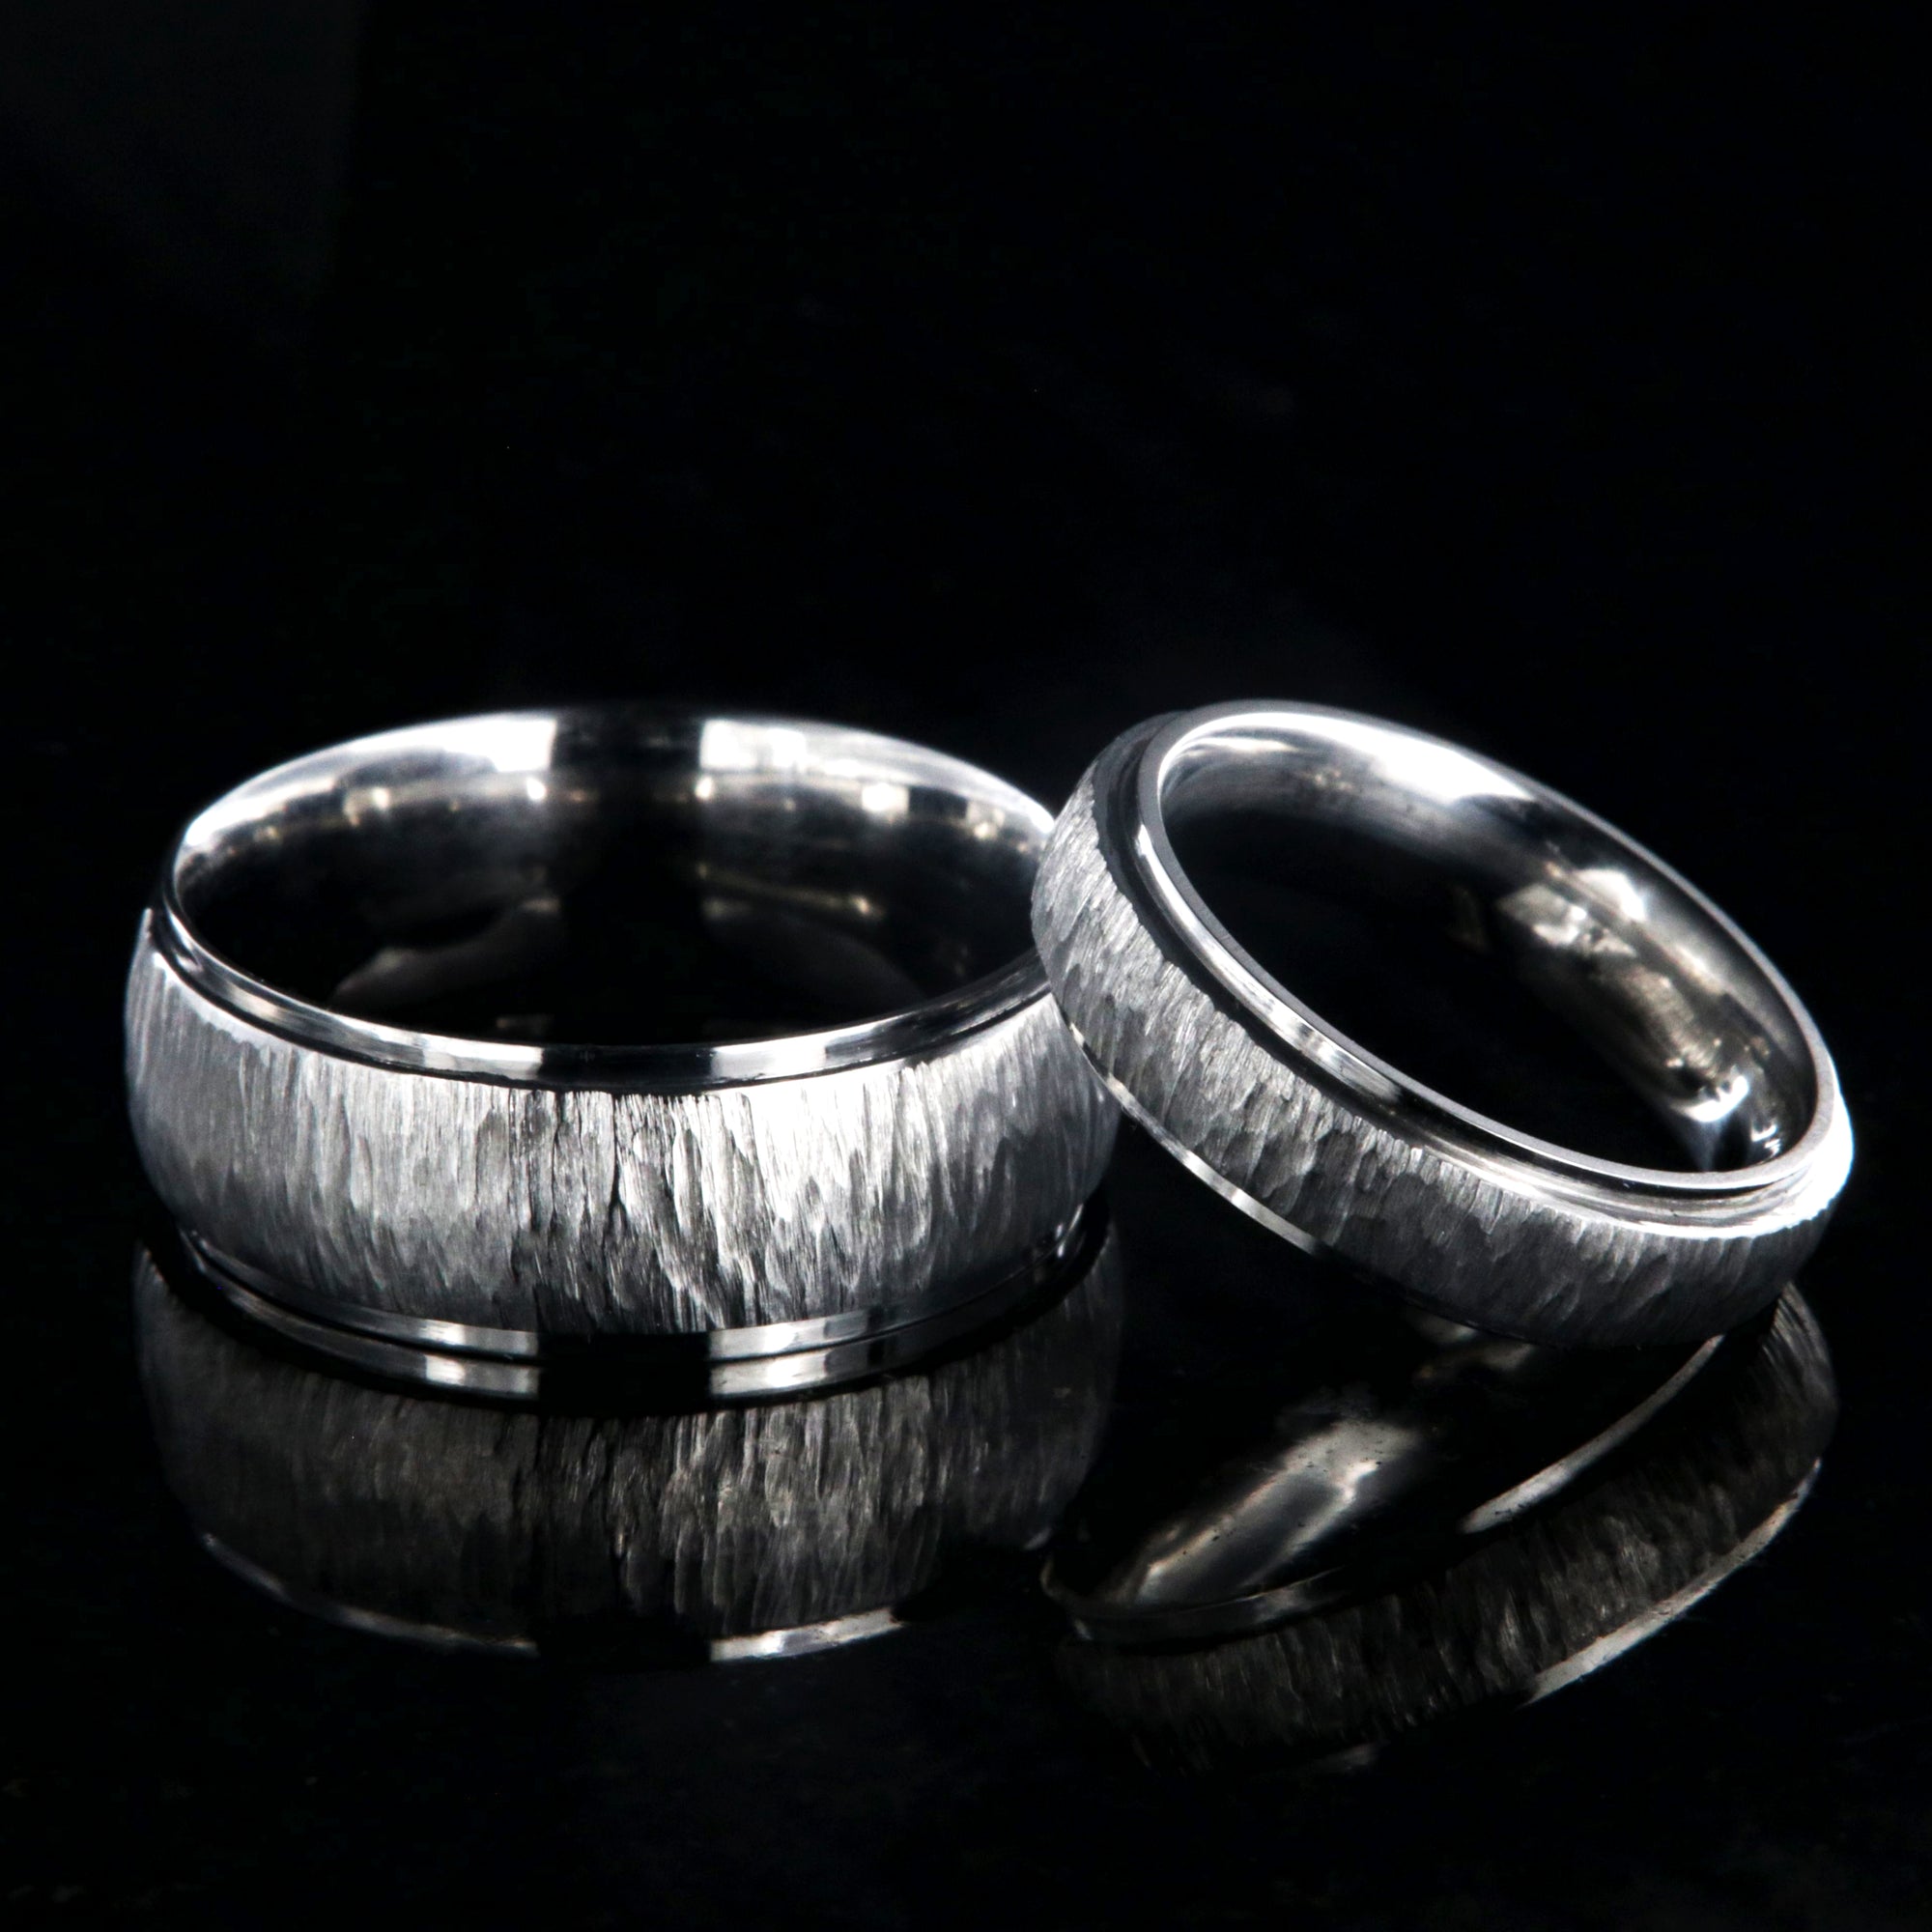 8mm and 5mm wide matching titanium wedding bands with a tree bark raised center